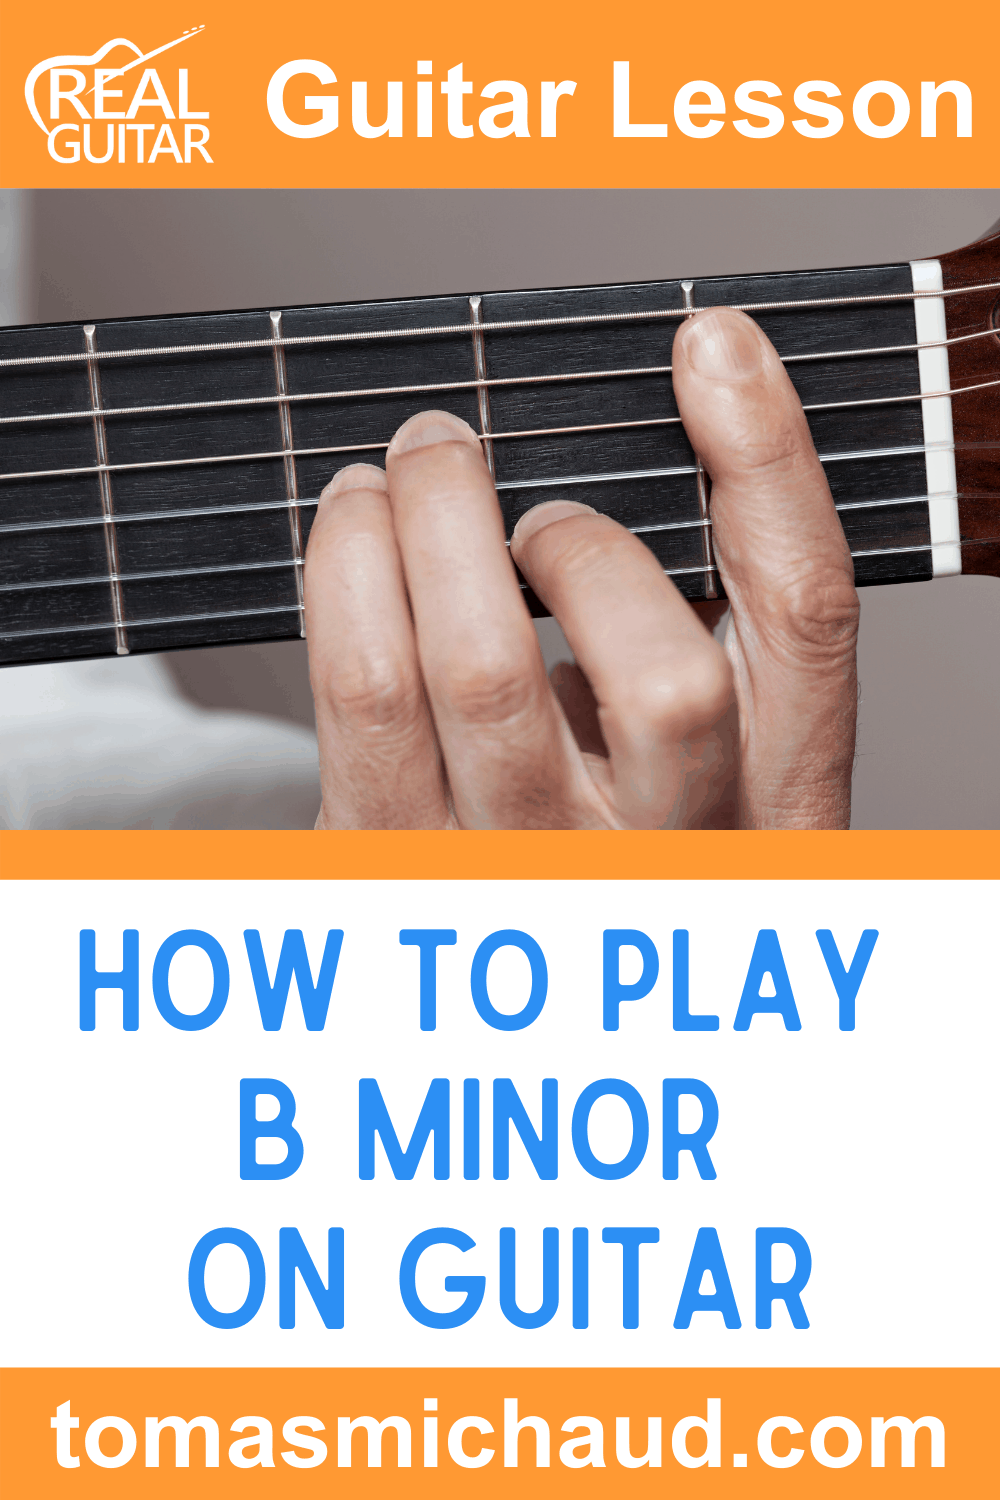 How to Play B Minor on Guitar